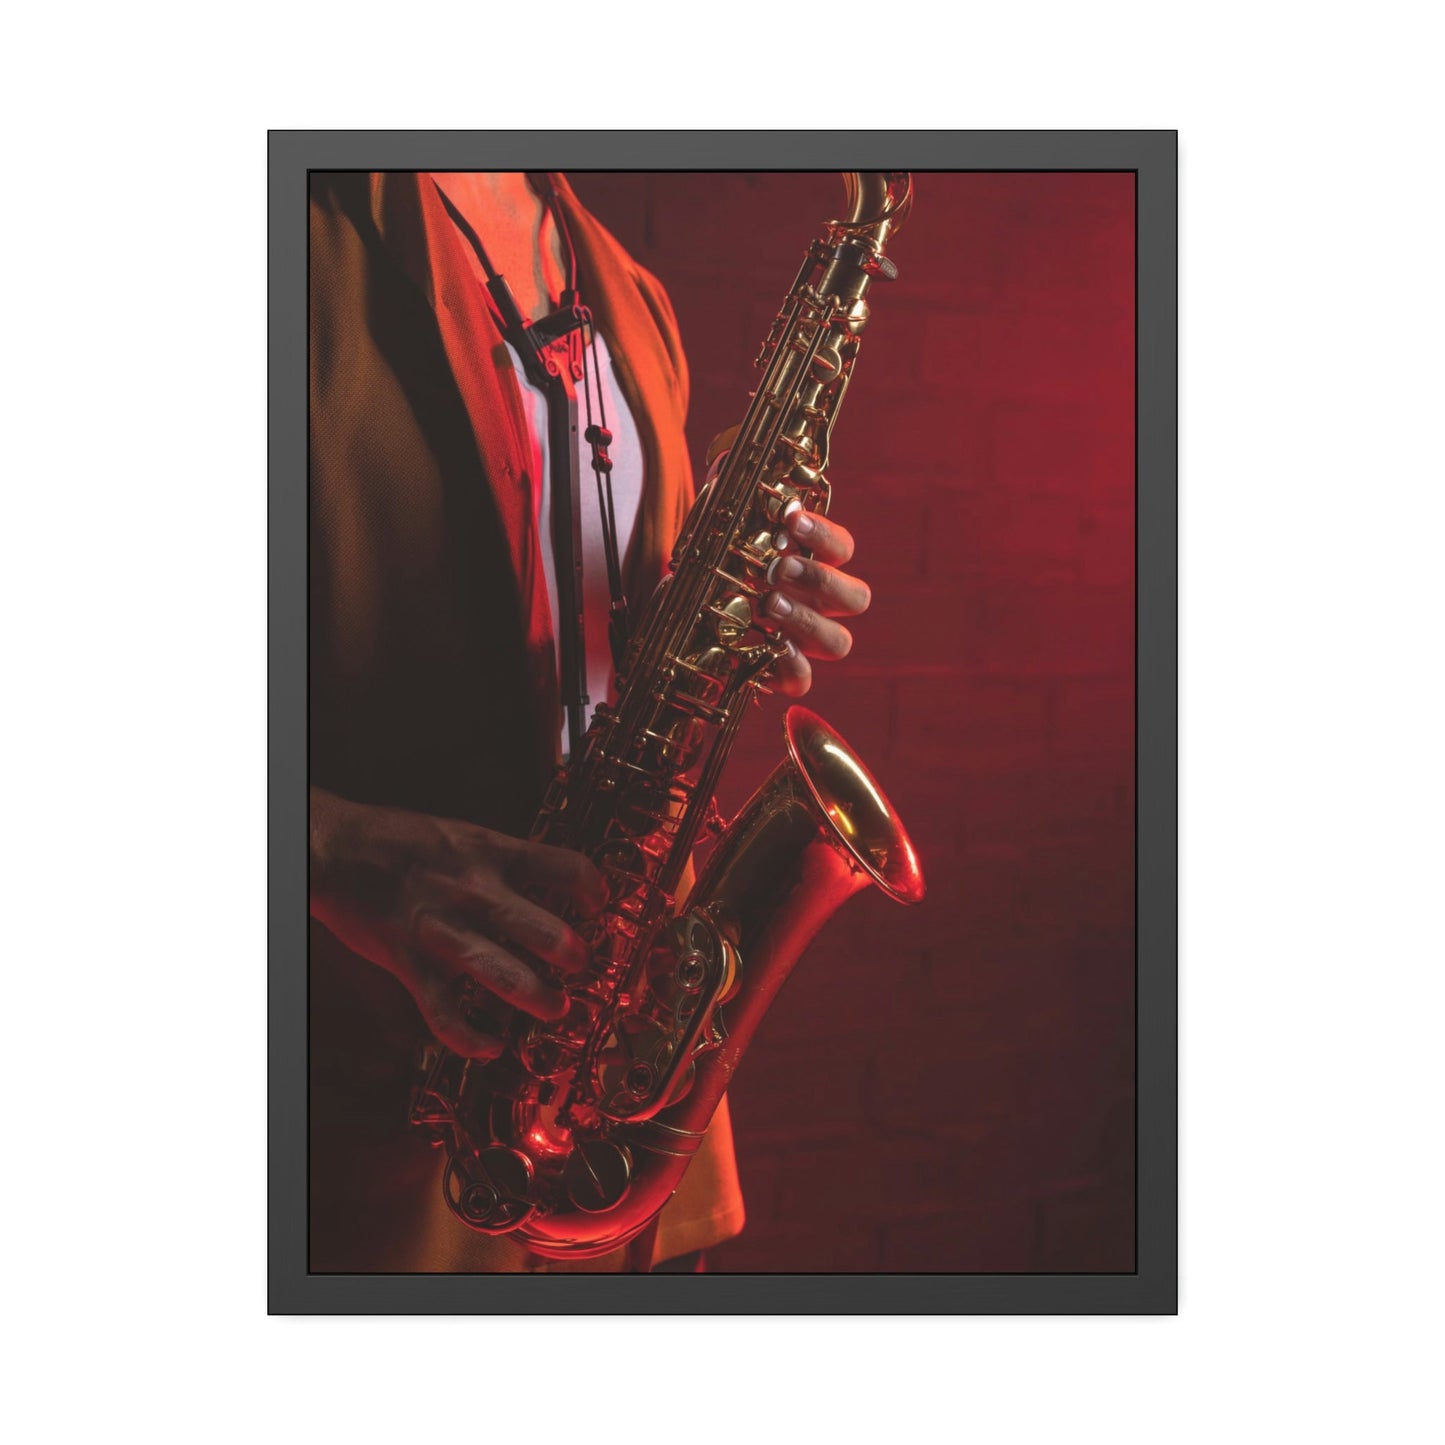 Blues Night: Poster and Print on Canvas with Mood-Setting Music Art